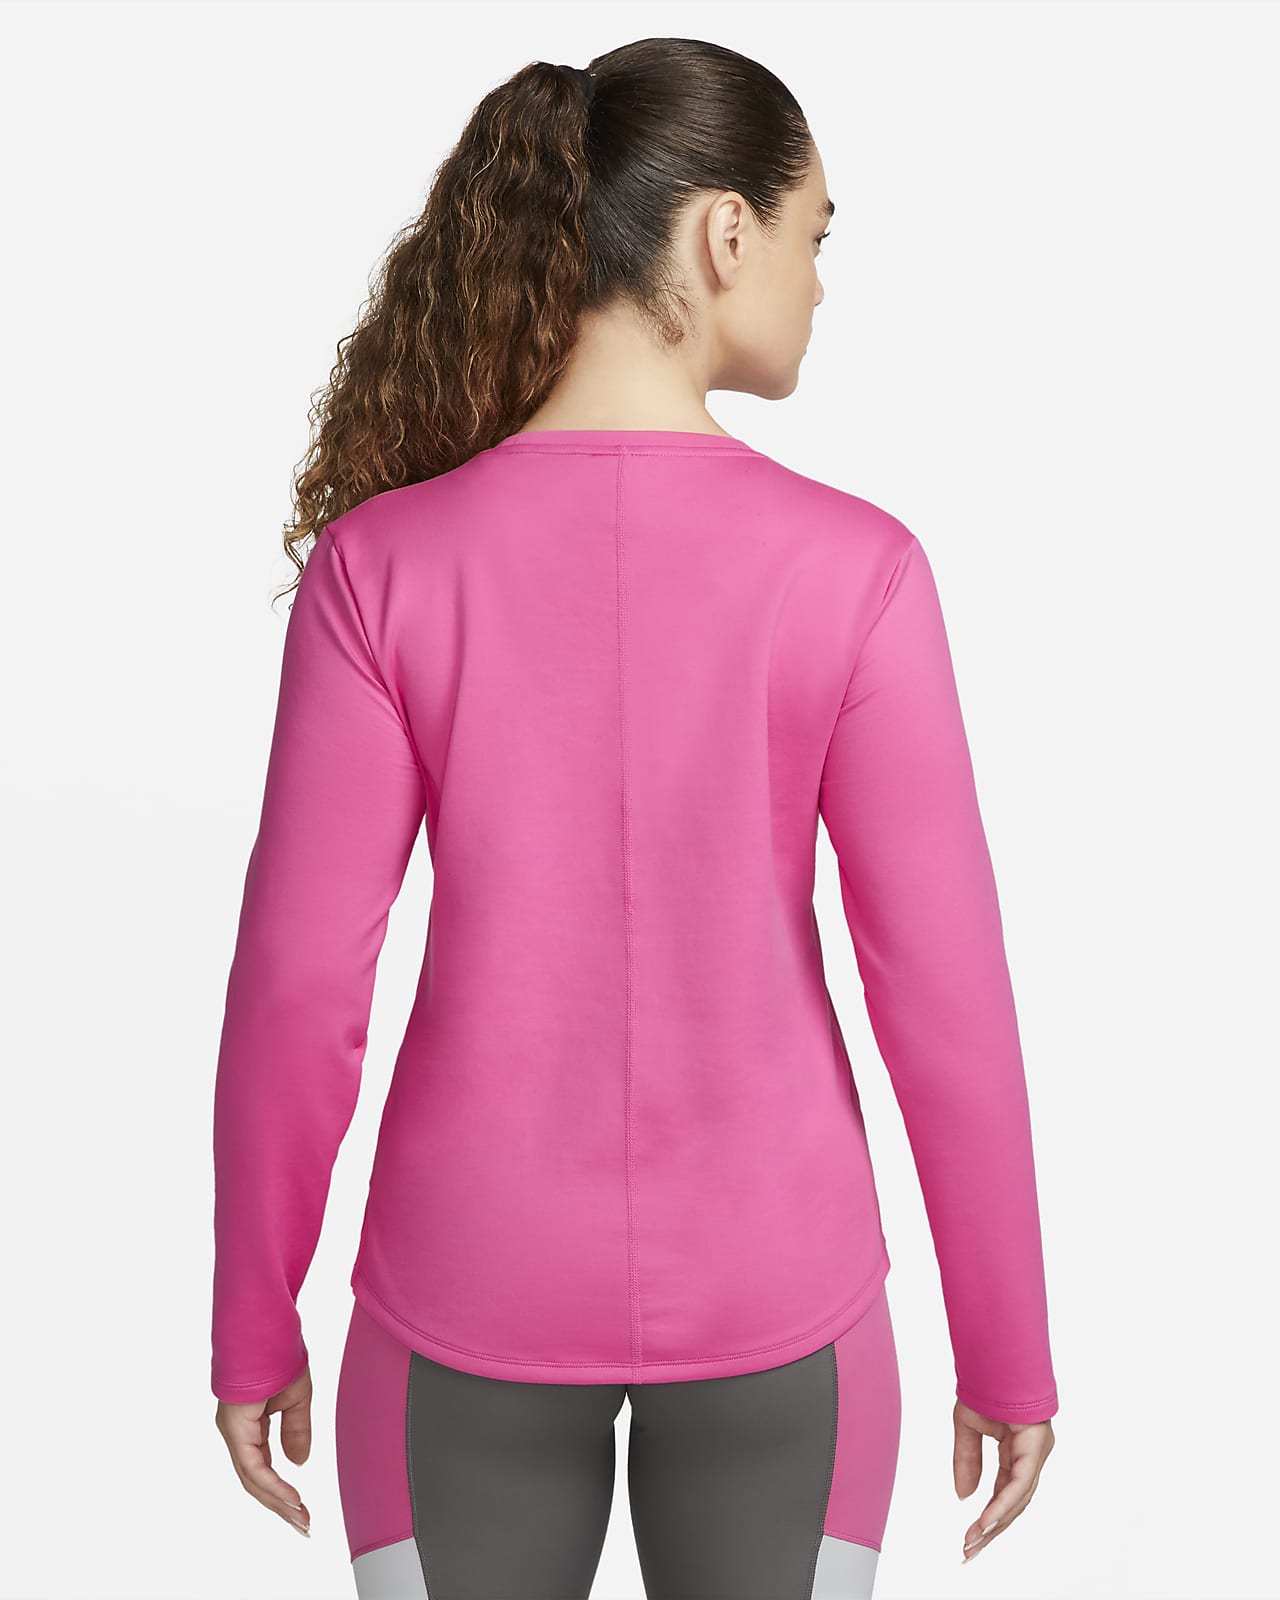 Unirse Resentimiento obra maestra Nike Therma-FIT One Women's Long-Sleeve Top. Nike.com